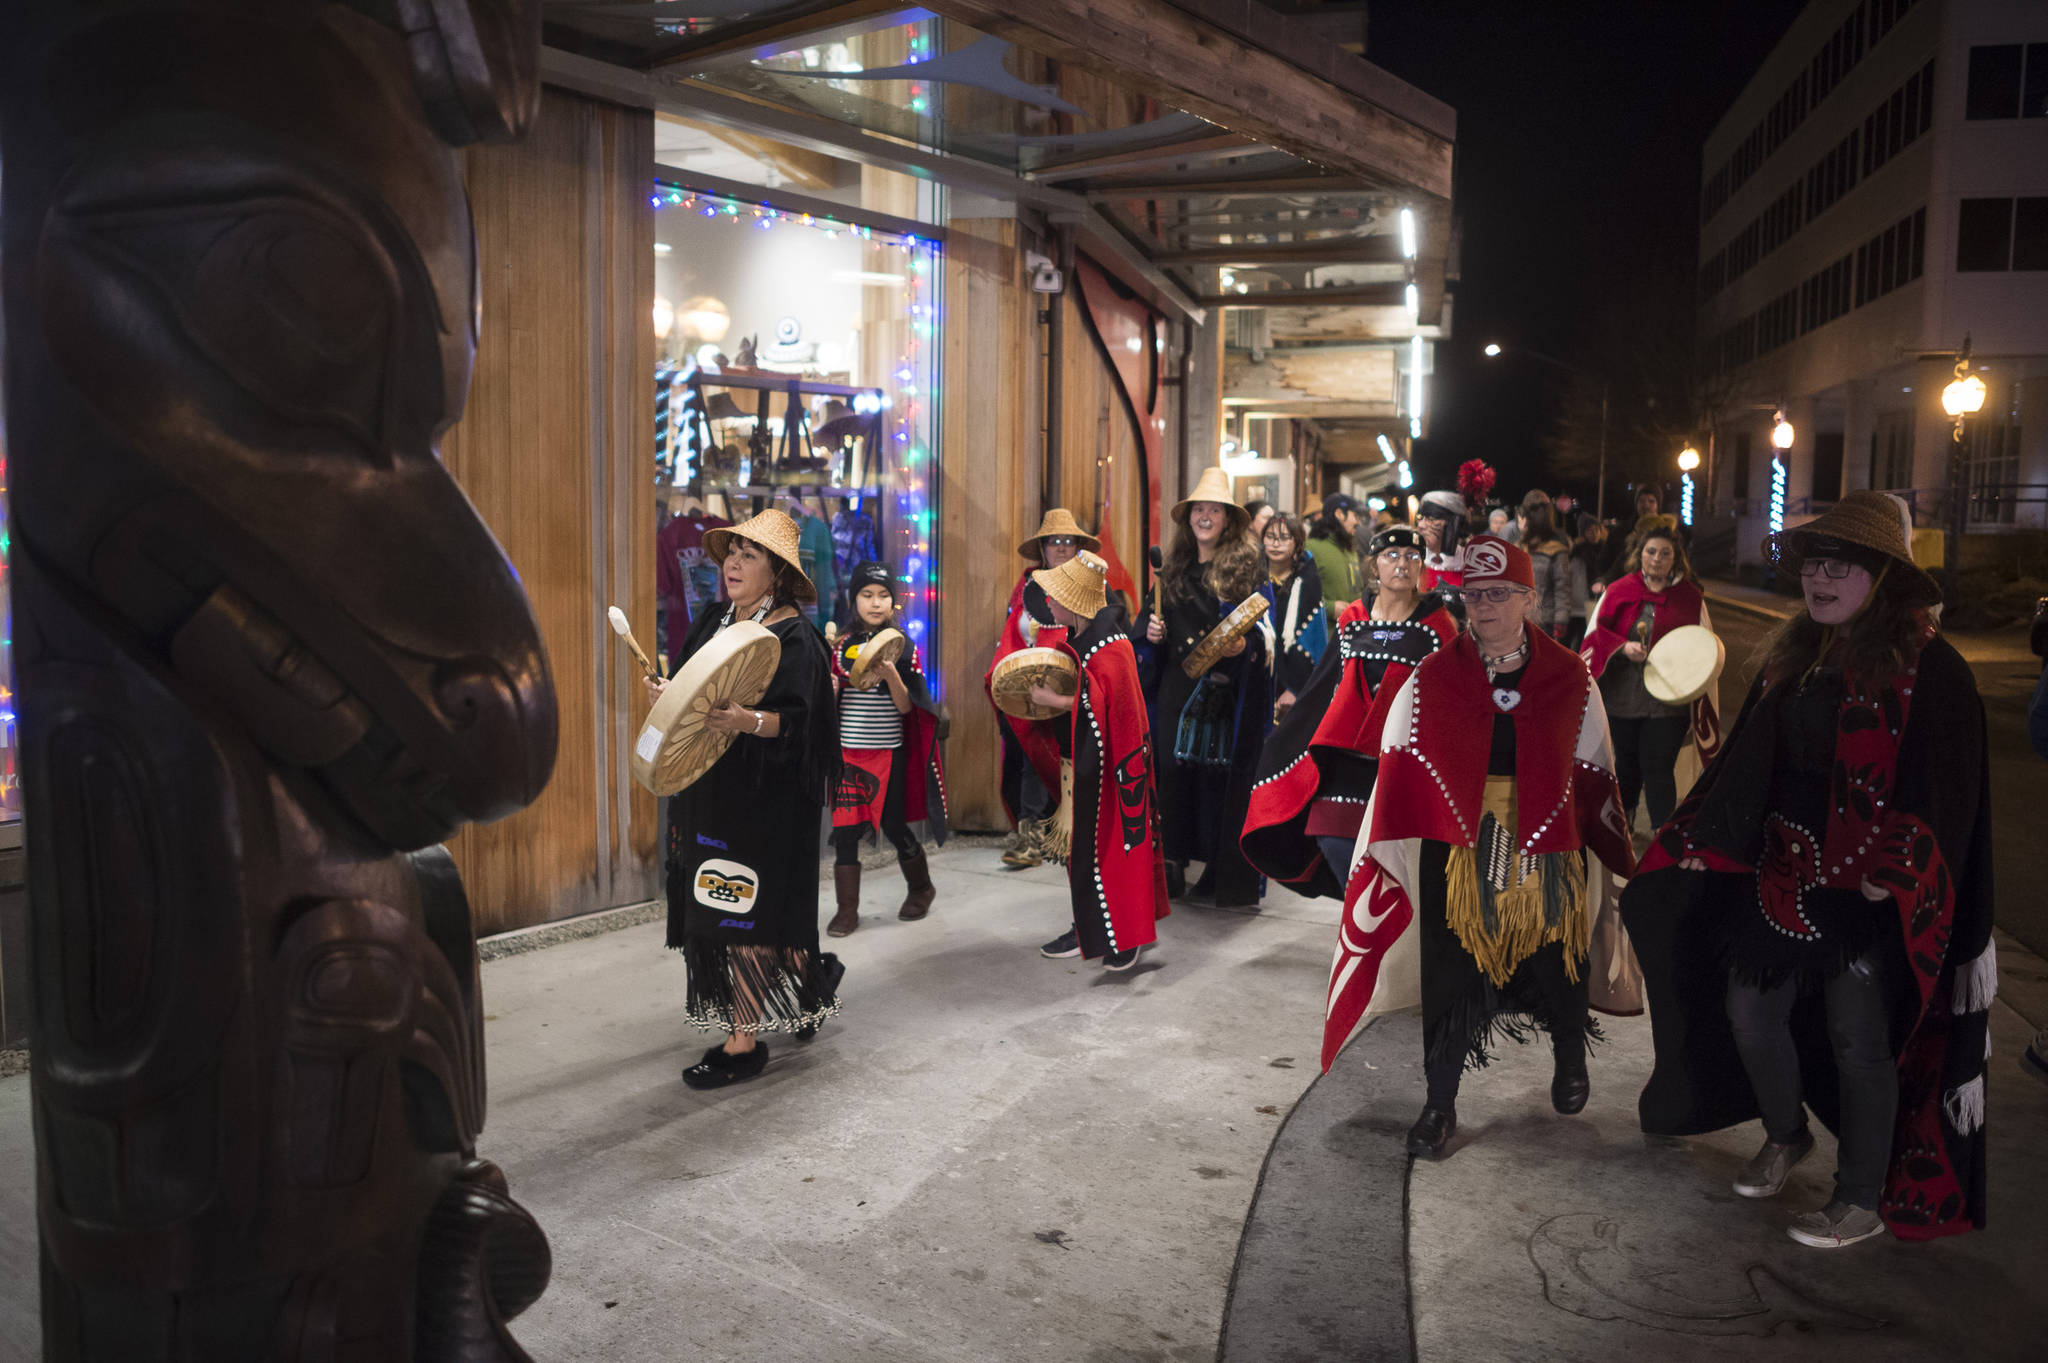 Nancy Barnes, left, leads the multicultural dance group Yees Ku Oo to Front Street to dance during Gallery Walk on Friday, Dec. 7, 2018. (Michael Penn | Juneau Empire)